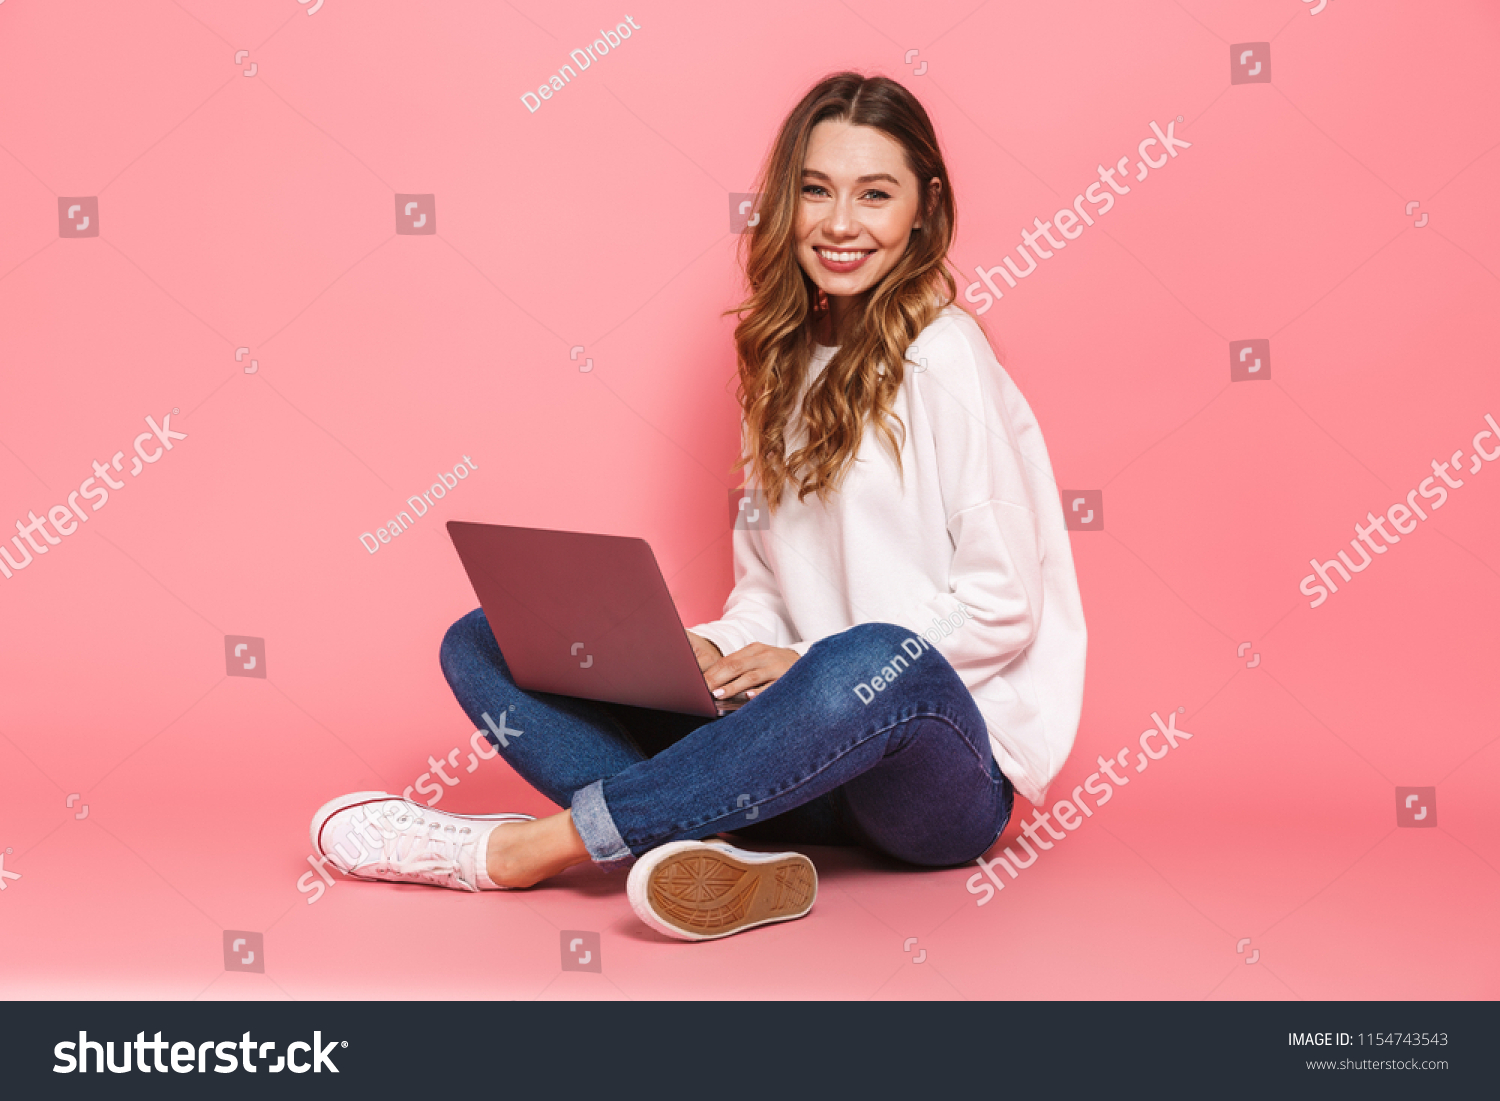 Portrait of a smiling young woman sitting with legs crossed, using laptop computer isolated over pink background #1154743543